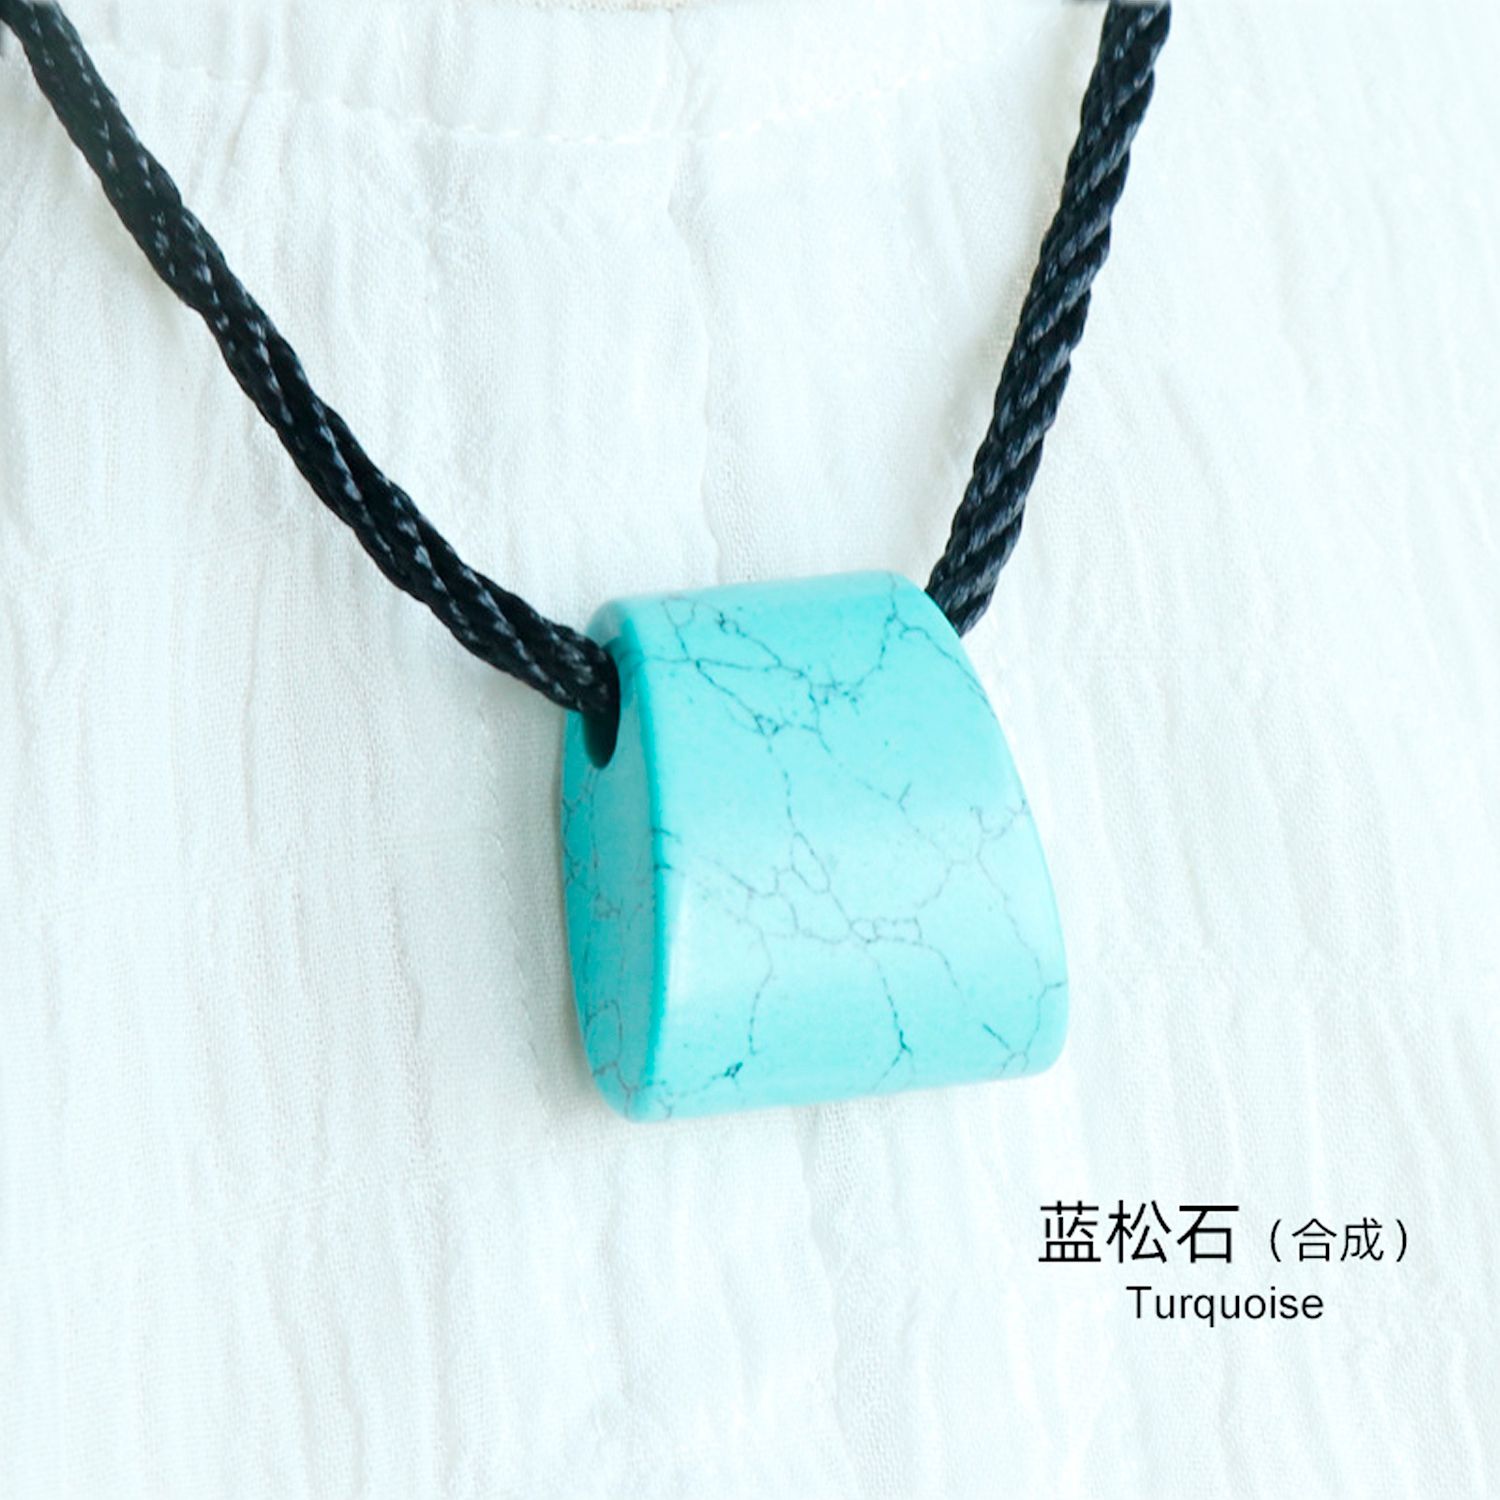 Syn, turquoise bleue